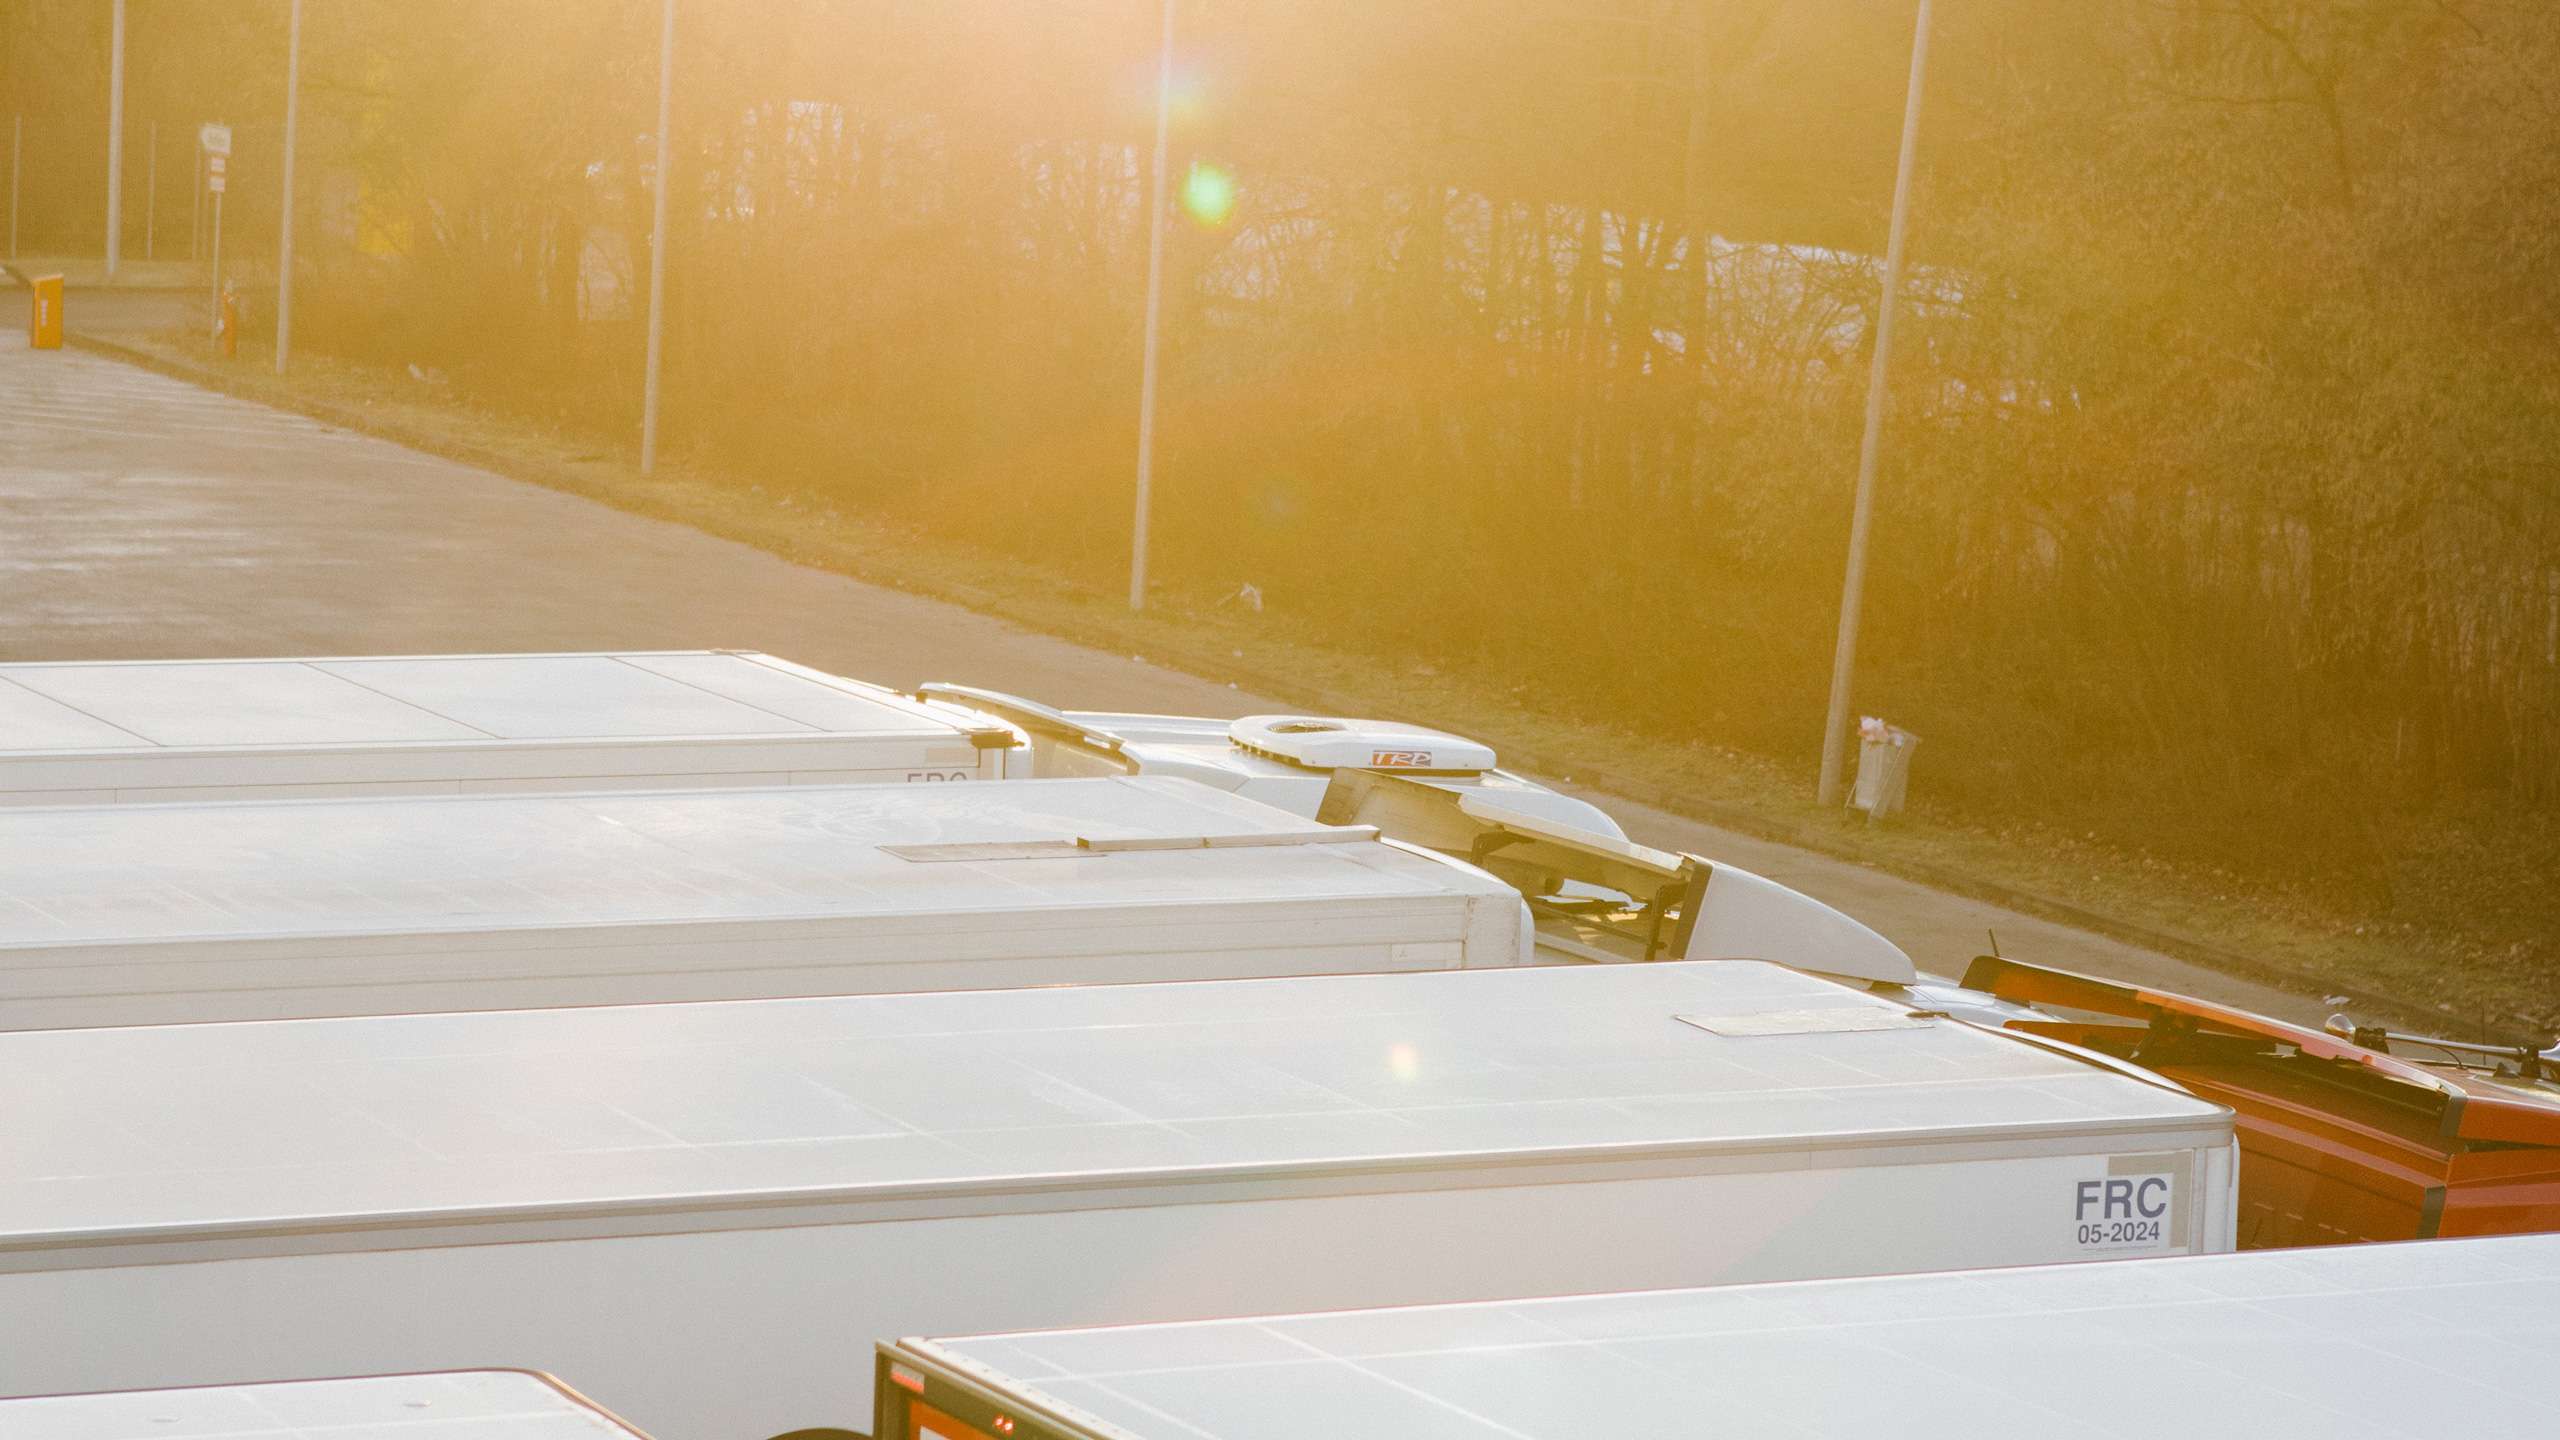 A row of trucks is parked in the light of the rising sun. The light reflects on their roofs.